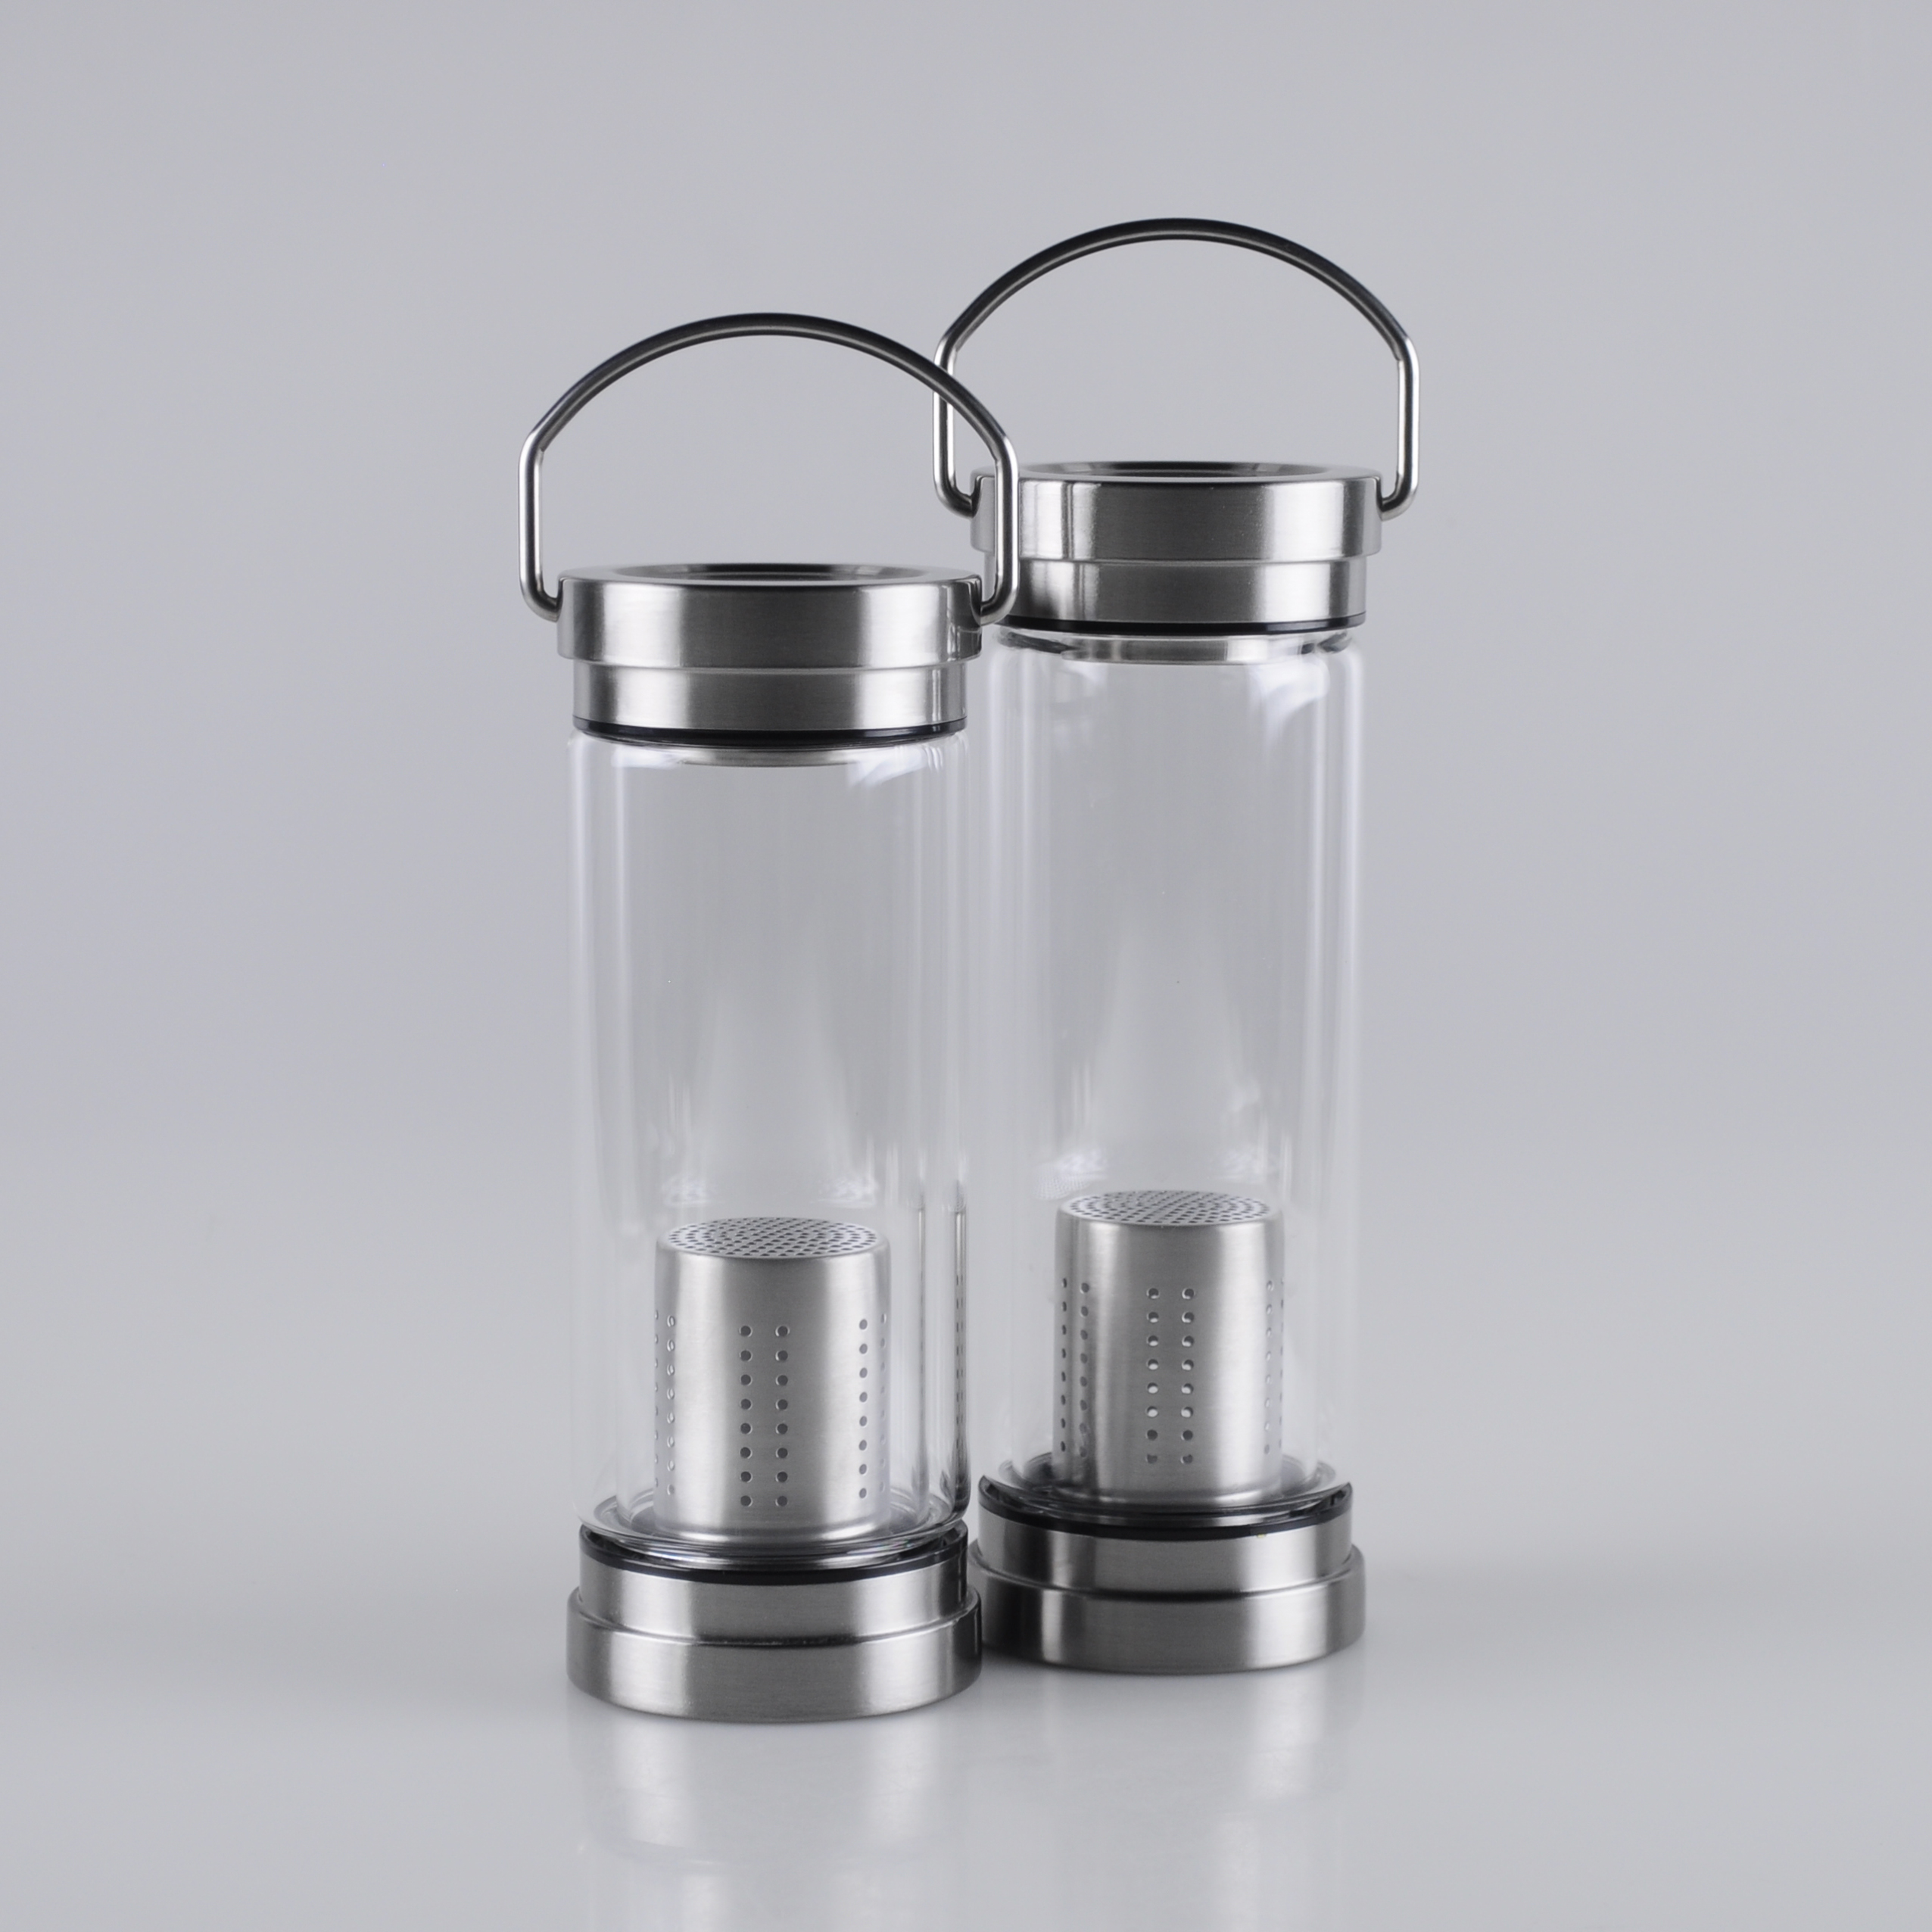 300ml-350ml-stainless-steel-lid-double-wall-glass-tea-cup (1)